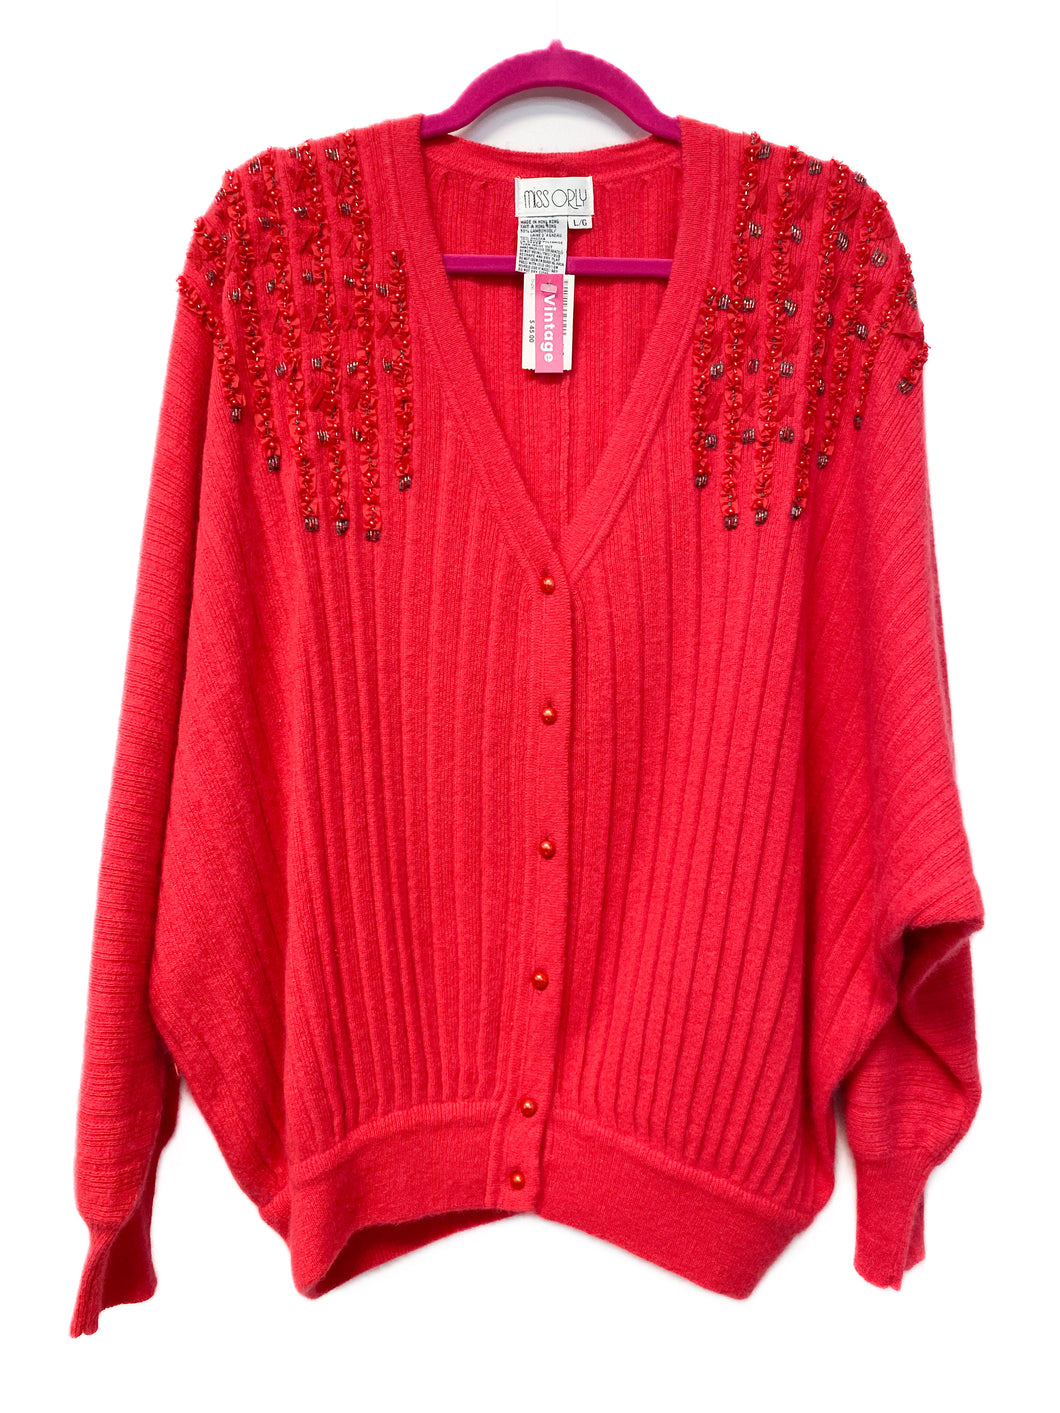 80’s Miss Orly Sweater (L)